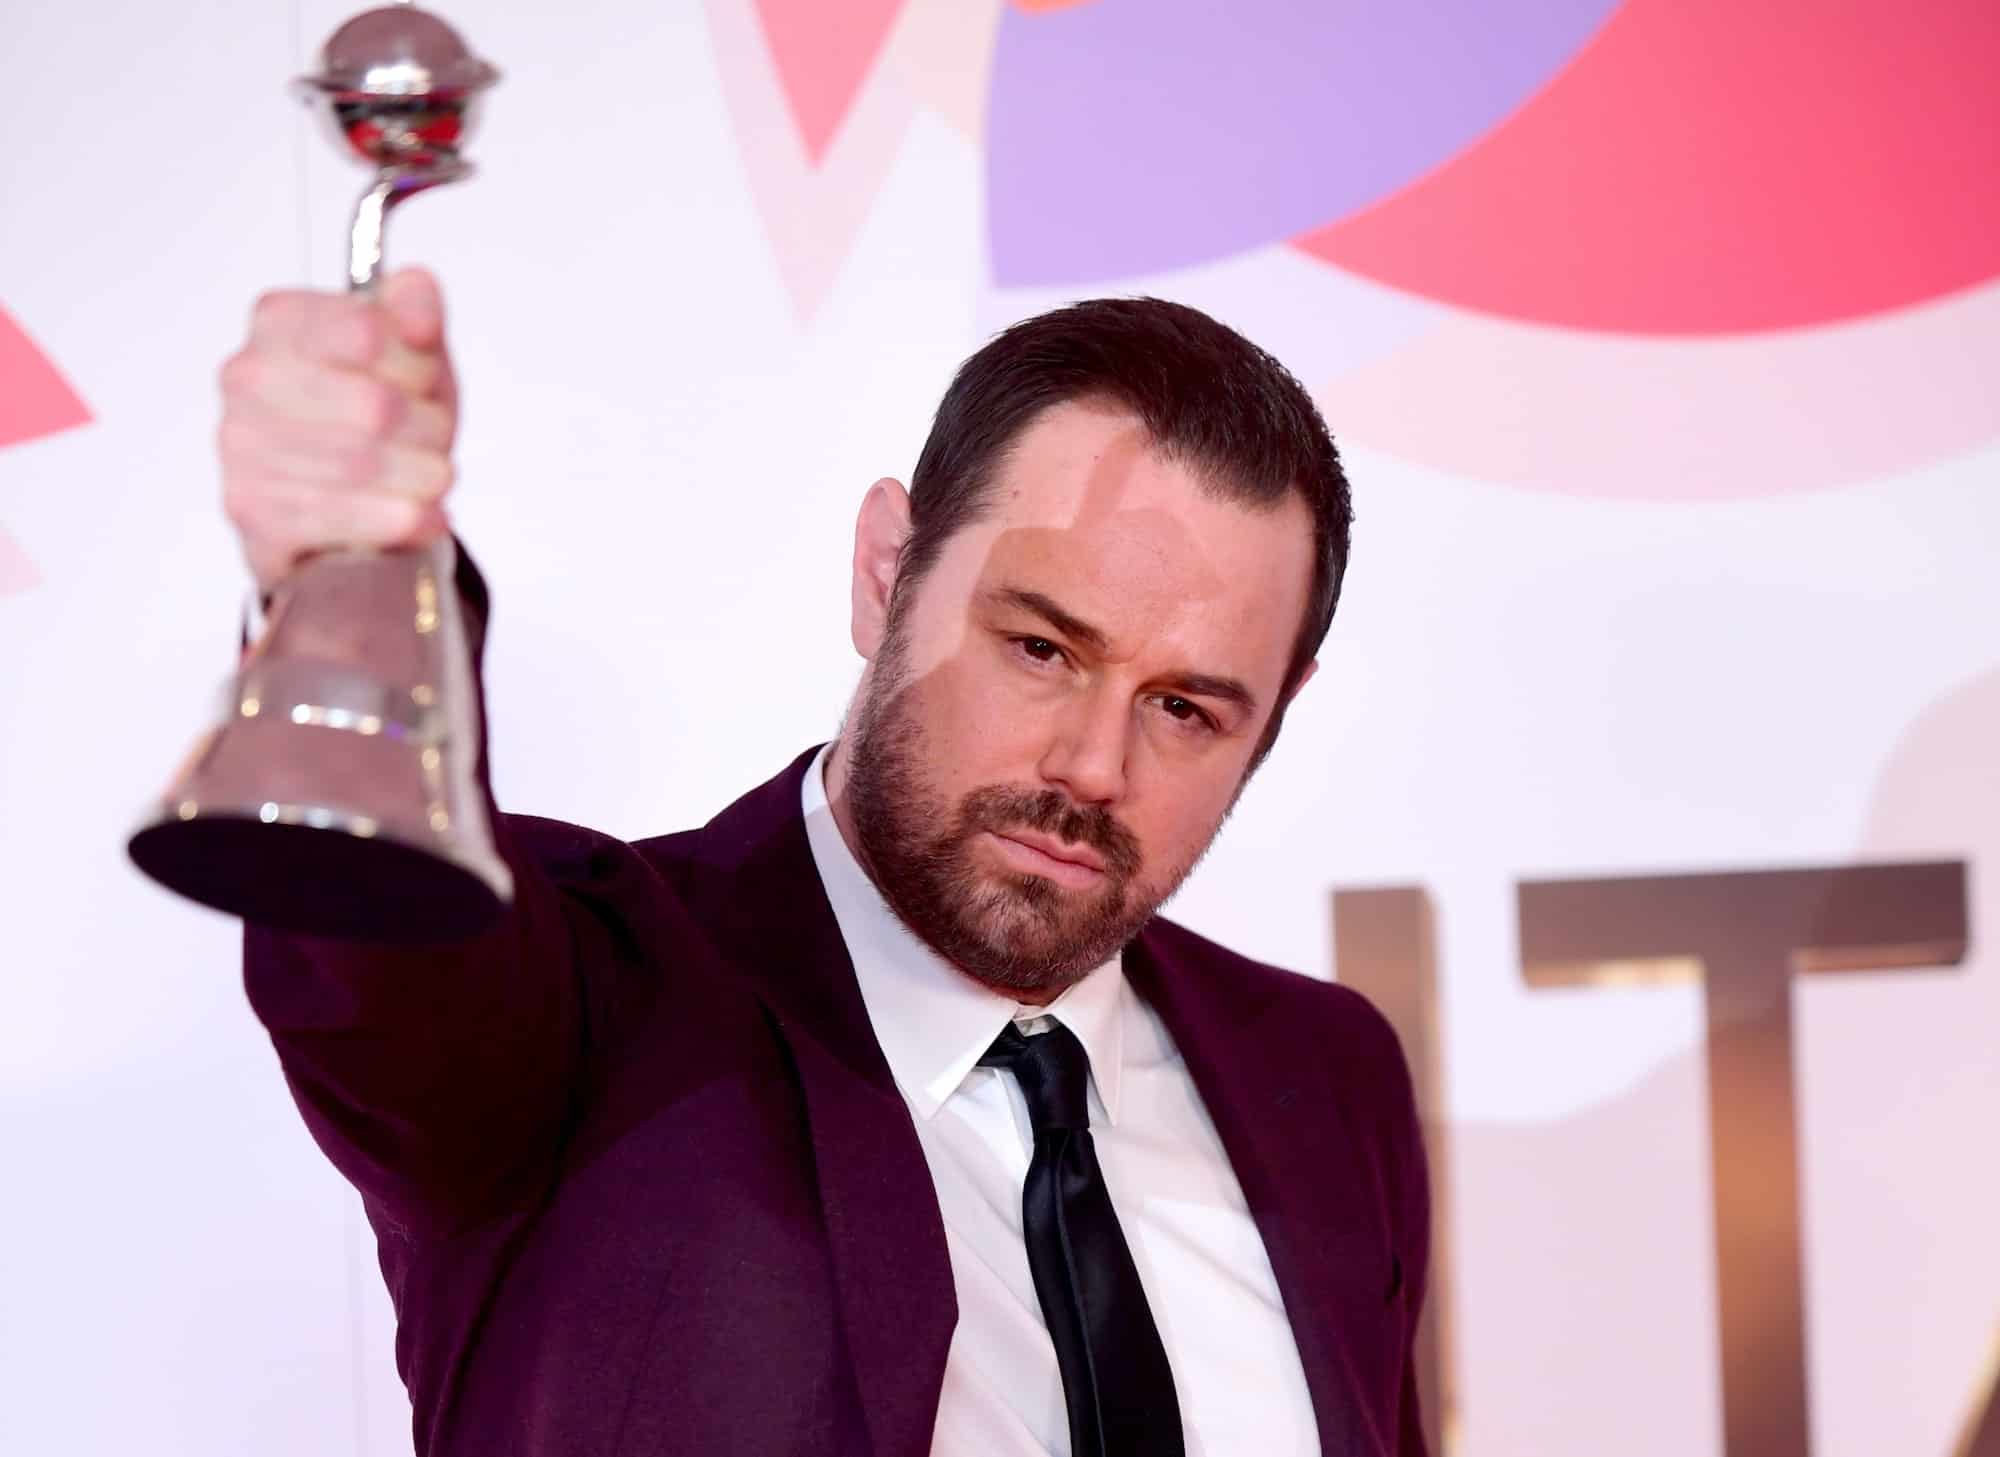 Watch – Danny Dyer calls Oswald Mosley a ‘melt’ & everybody gave ‘Nazis a good kicking’